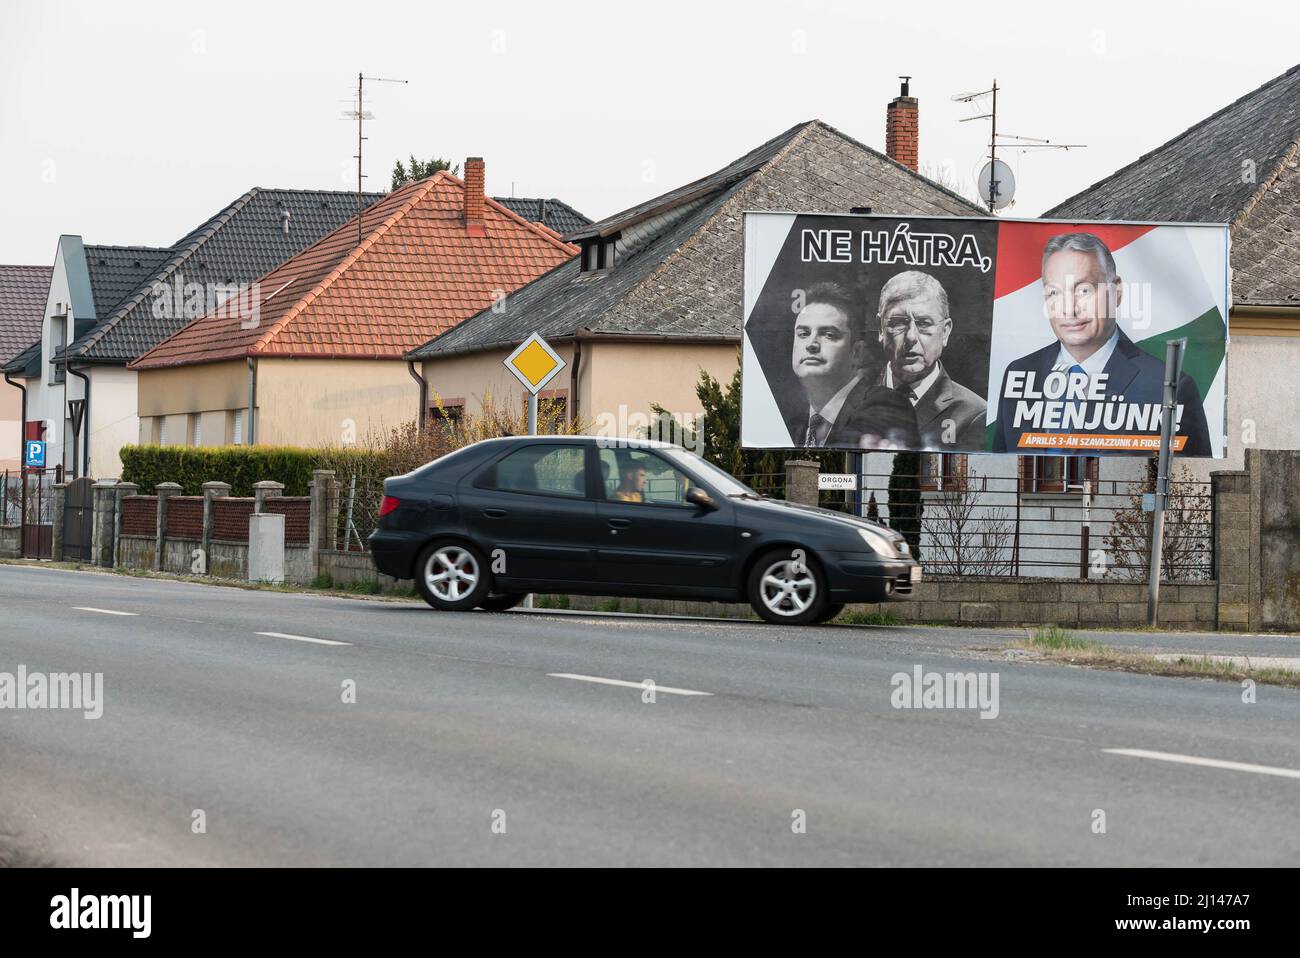 Car pass by election billboard for Fidesz party placed on the street of Mosonmagyarovar. On the billboard (from left to right) the leader of opposition Peter Marki-Zay, former prime minister Ferenc Gyurcsany, and Hungarian prime minister and leader of Fidesz Viktor Orban. Mosonmagyarovar is the town in northwest Hungary located approx. 160 kilometers from Hungarian capital Budapest. Peter Marki-Zay will challenge prime minister Viktor Orban in the upcoming parliamentary elections, which will be held on the 3rd of April 2022. (Photo by Tomas Tkacik/SOPA Images/Sipa USA) Stock Photo